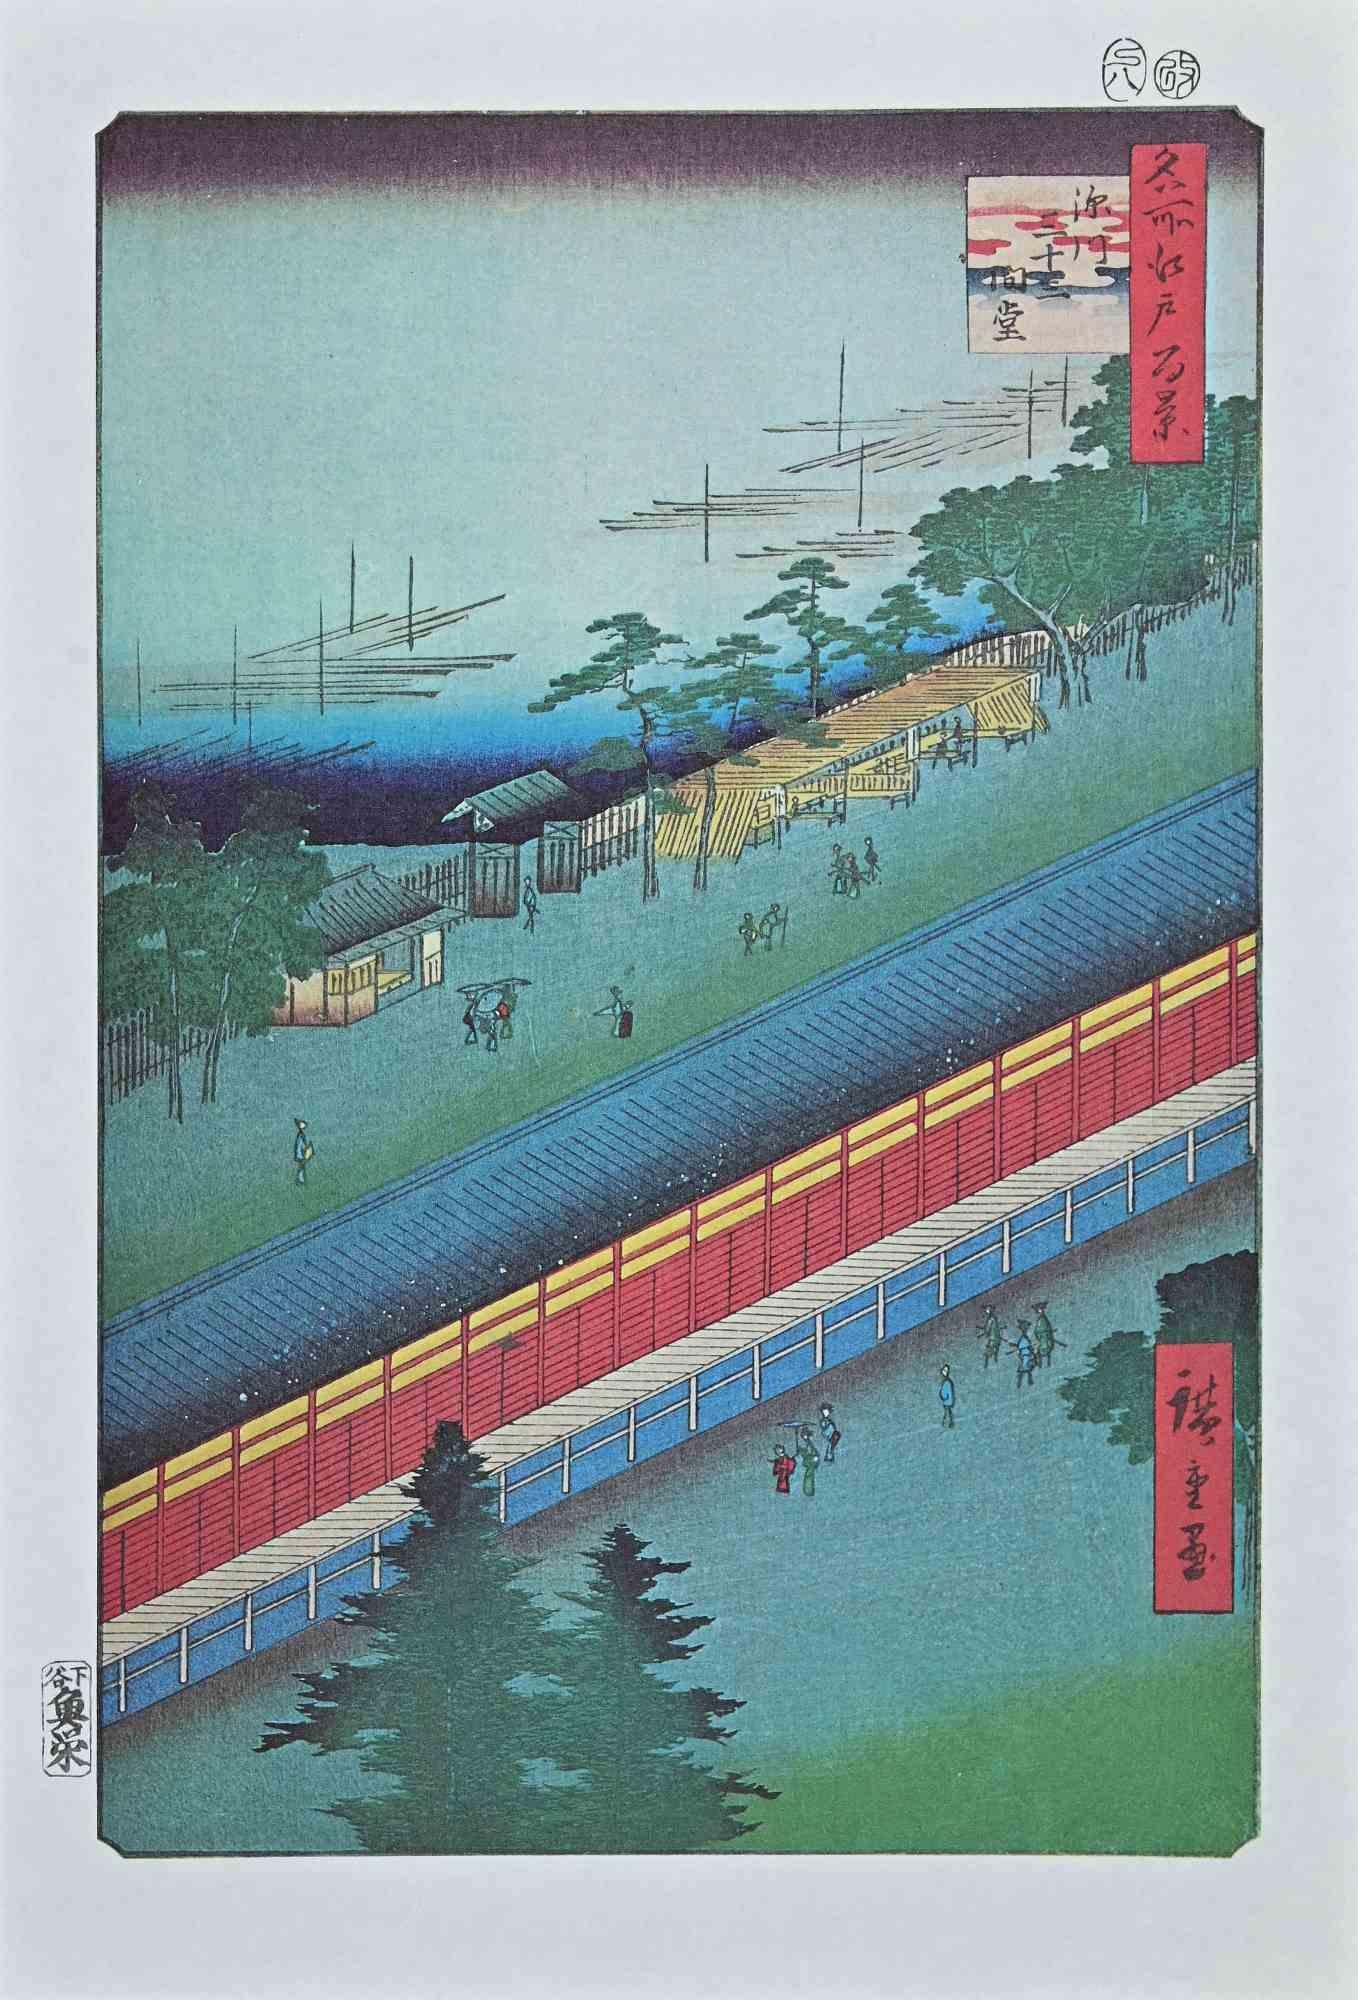 Hall of Thirty-Three Bays is a modern artwork realized in the Mid-20th Century.

Mixed colored lithograph after a woodcut realized by Utagawa Hiroshige in 1857 and from the series "Meisho Edo Hyakkei" ("One Hundred Famous Views of Edo"). 

Good